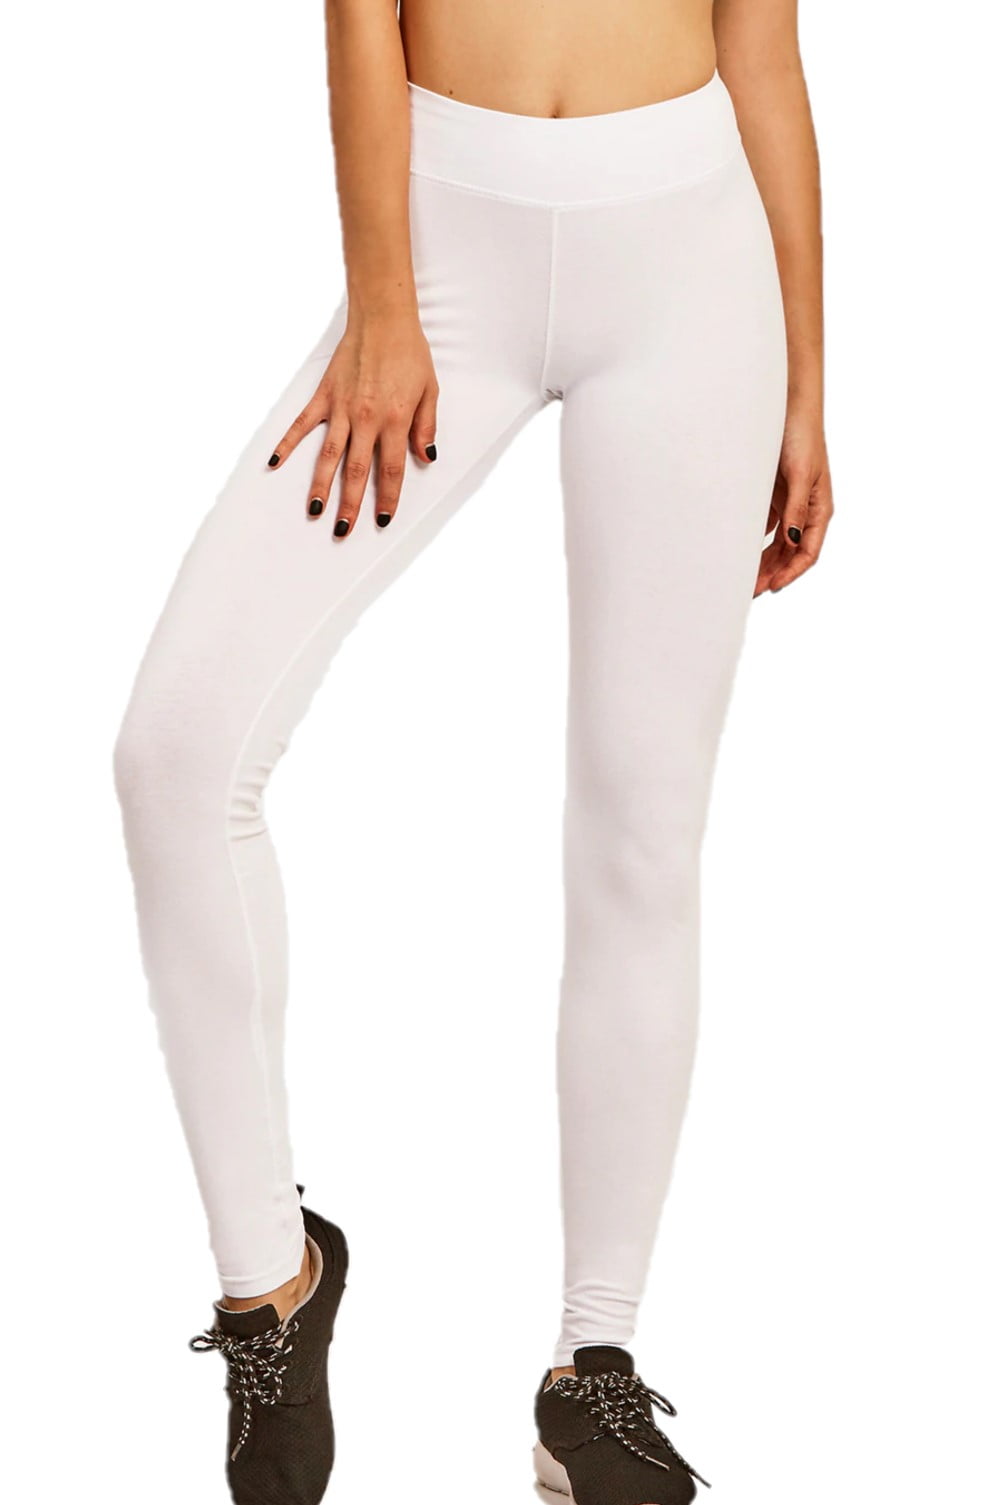 Women's Skinny Leather Pants High Waisted Stretch Pull On Ankle